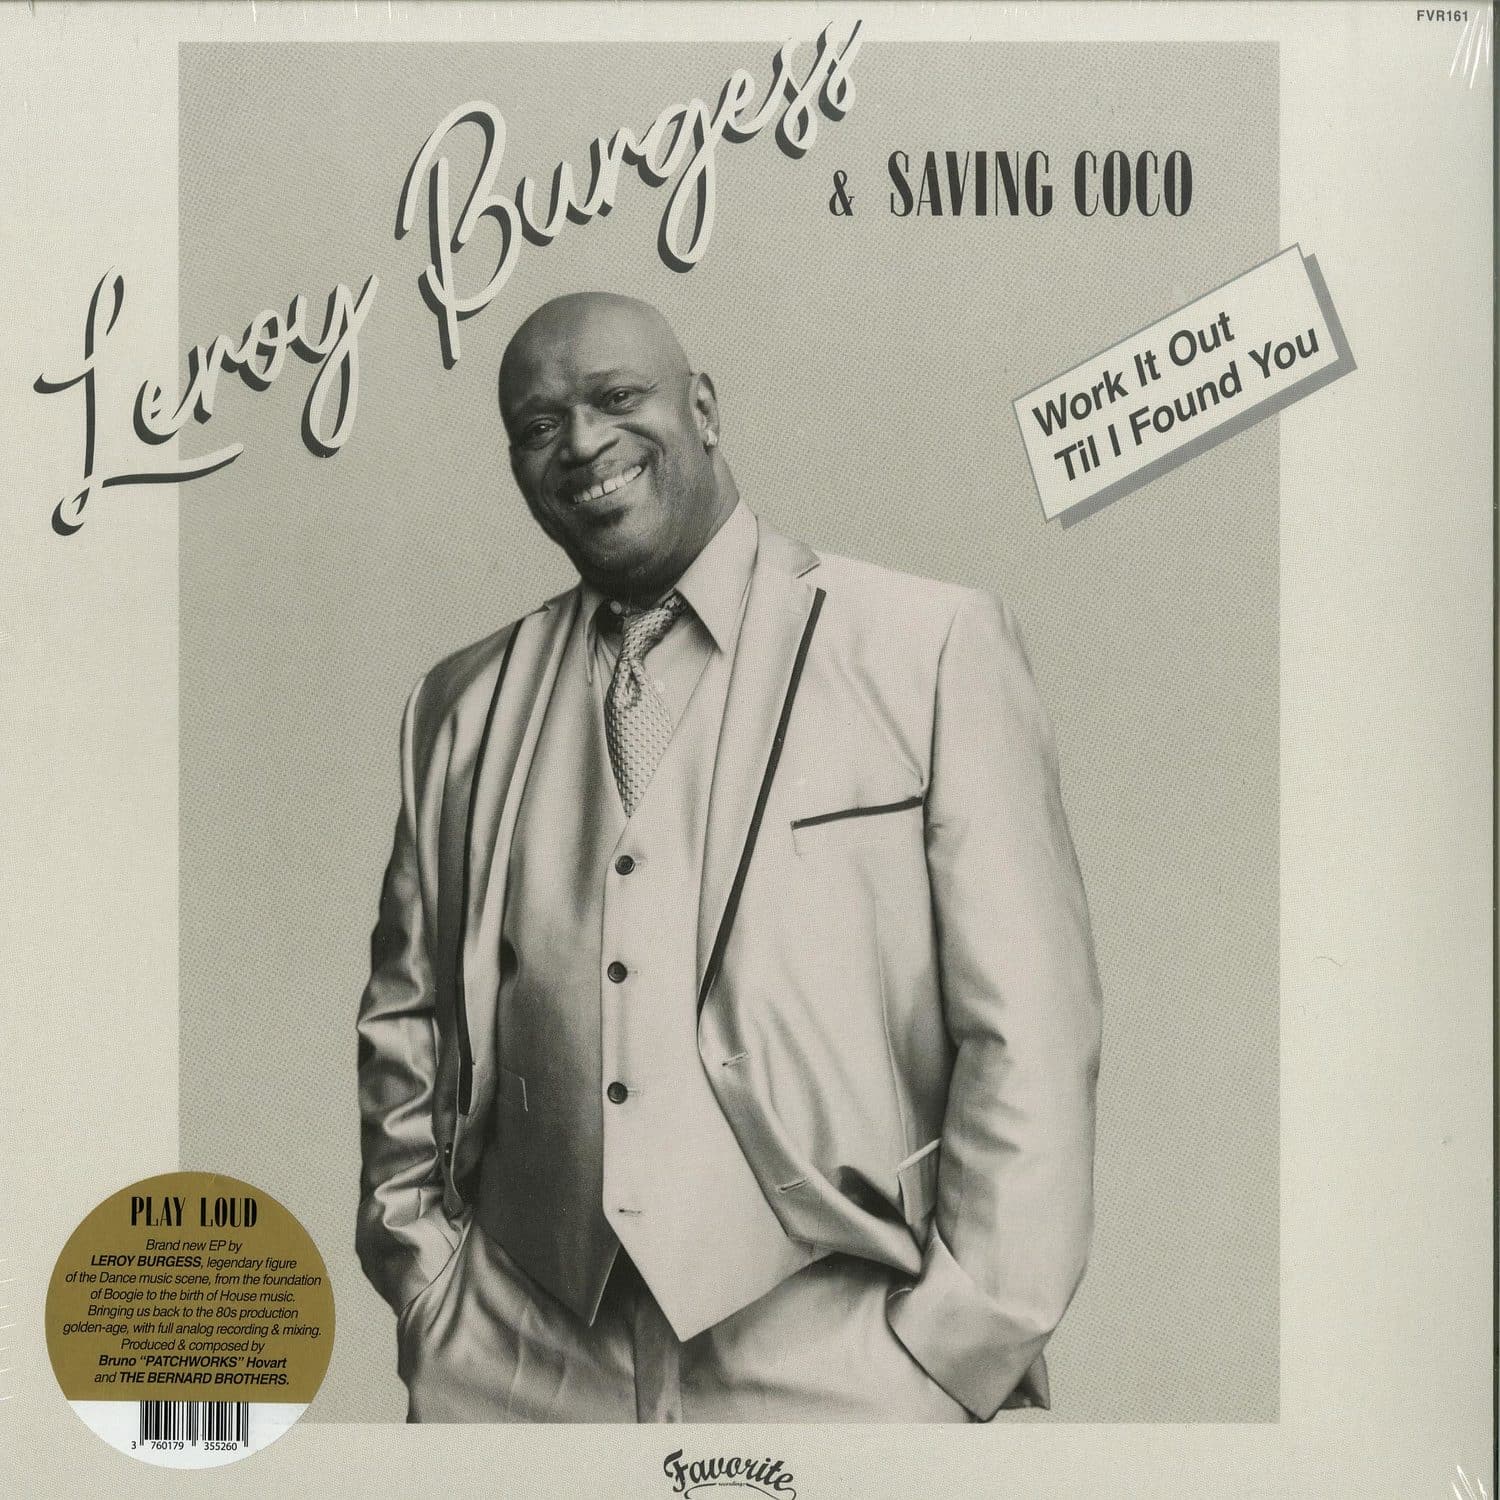 Leroy Burgess & Saving Coco - WORK IT OUT / TIL I FOUND YOU